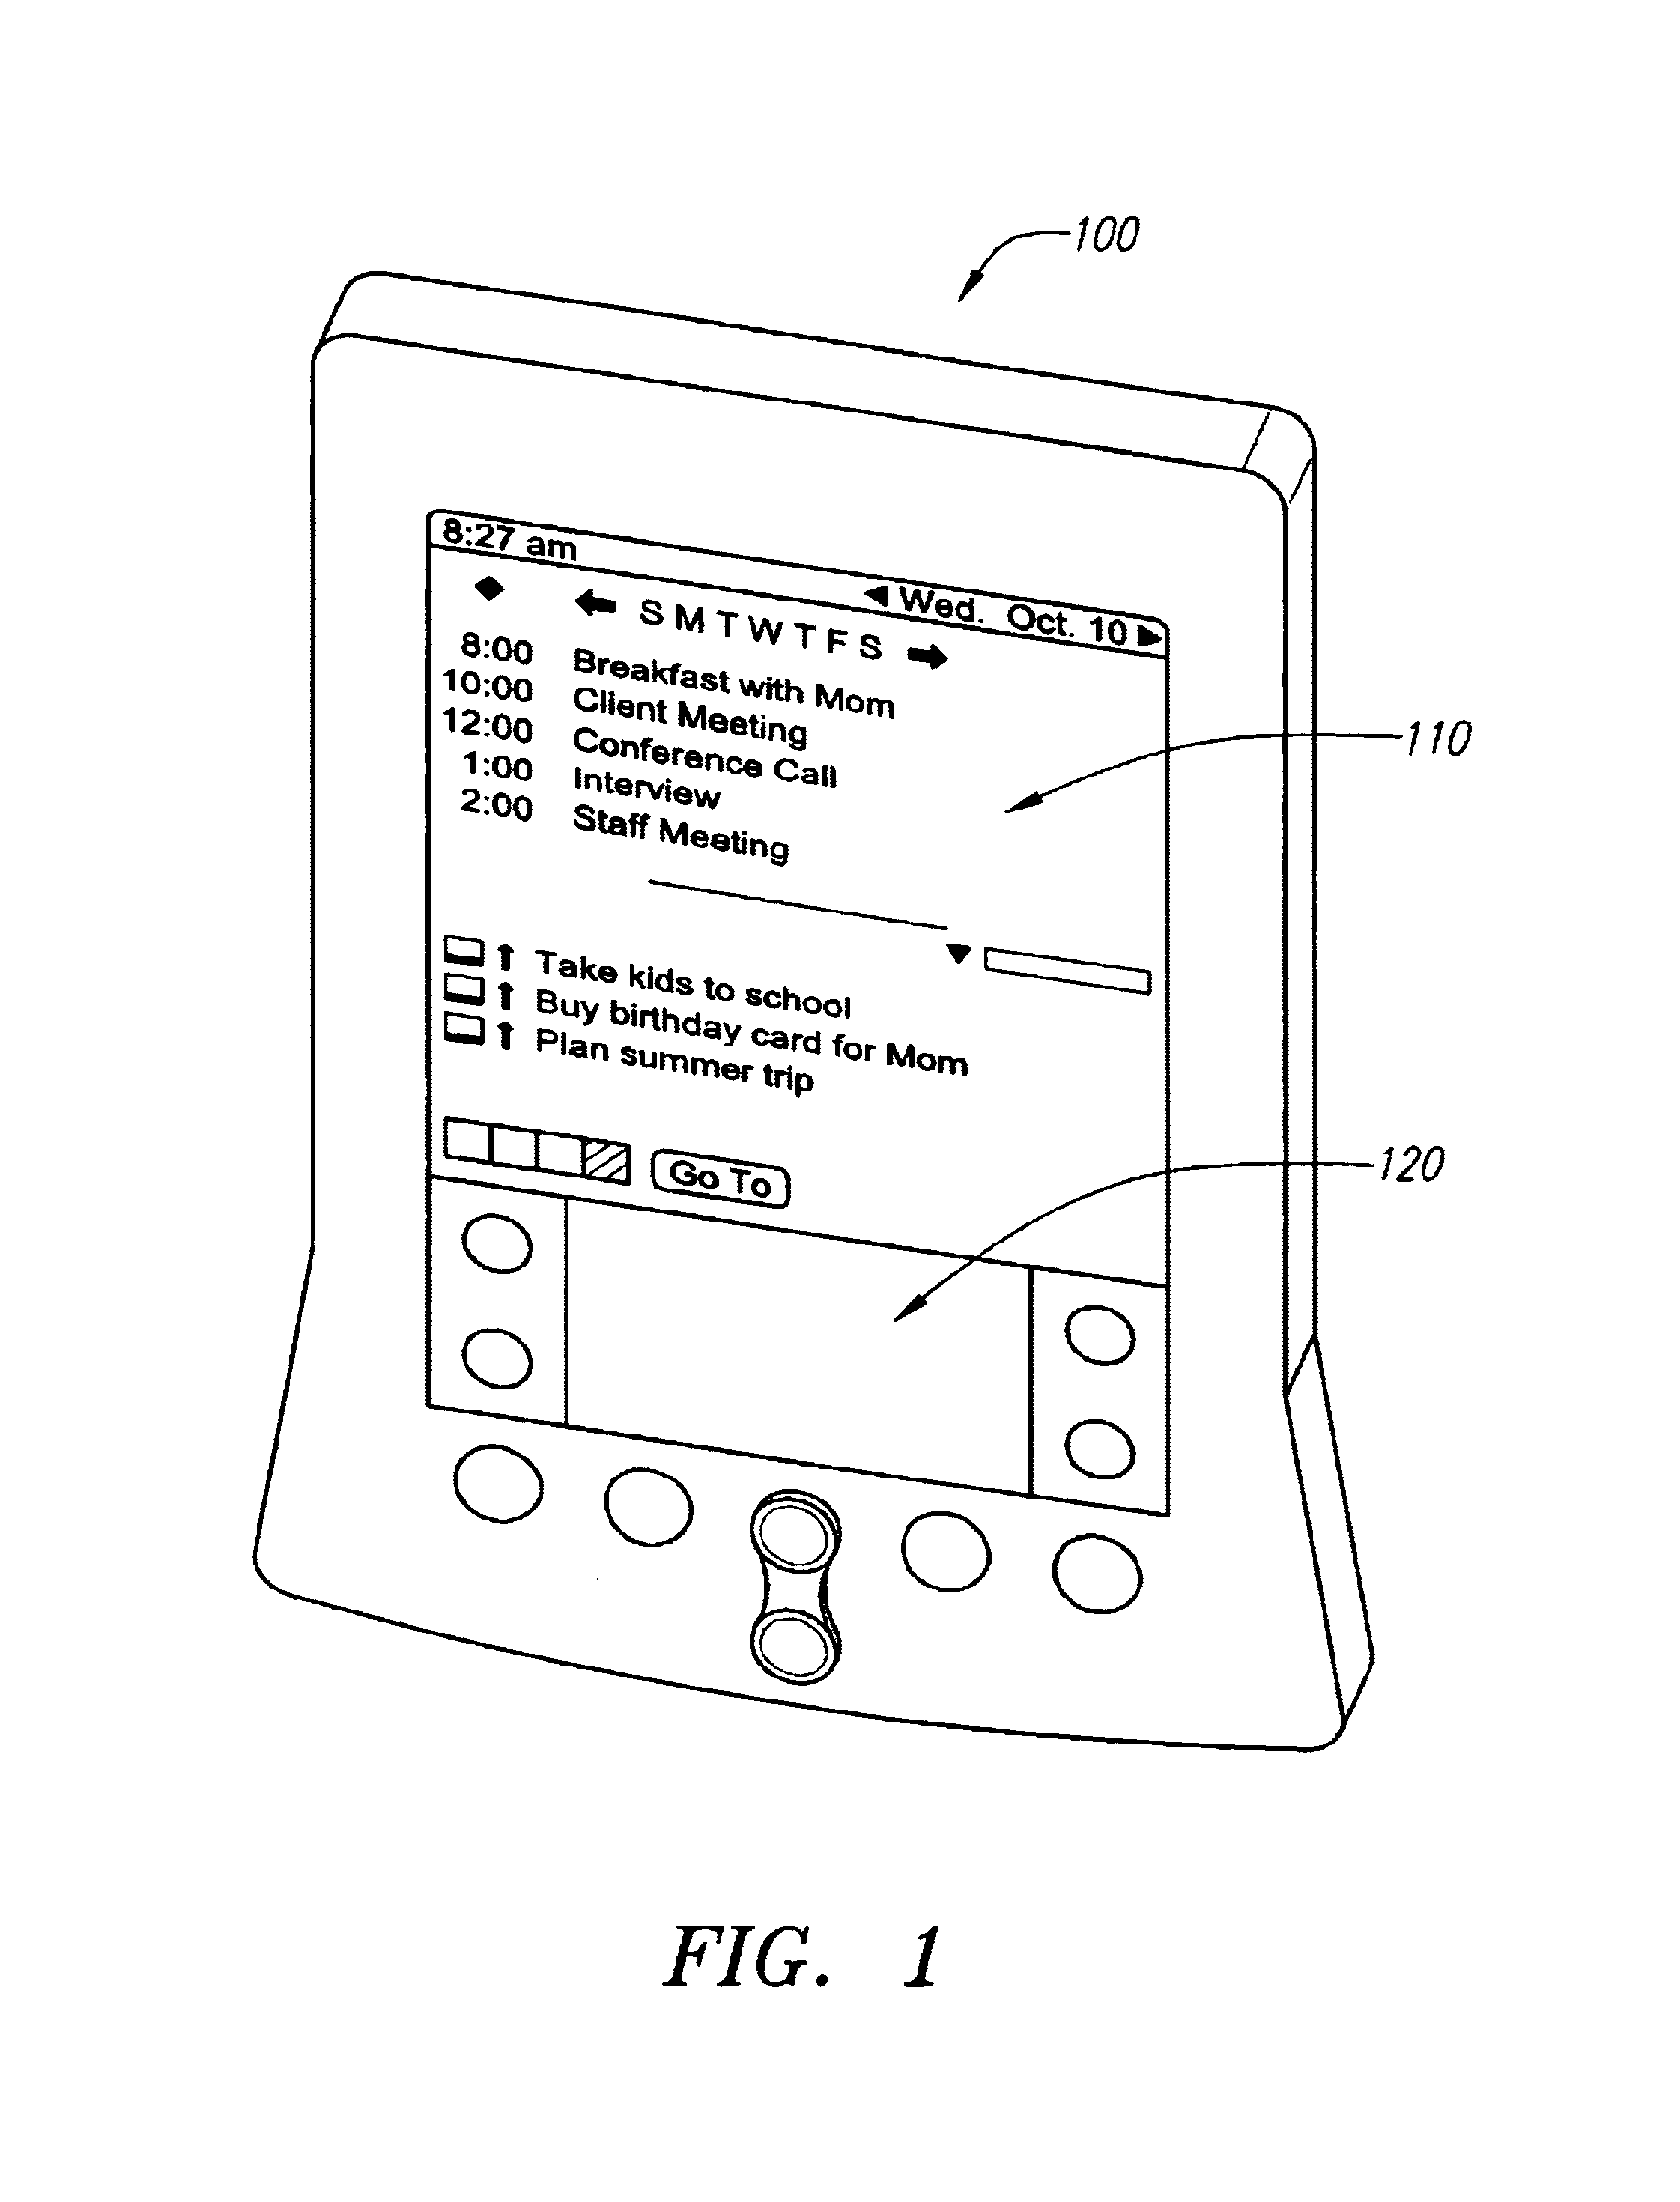 Method and apparatus for integrating phone and PDA user interface on a single processor